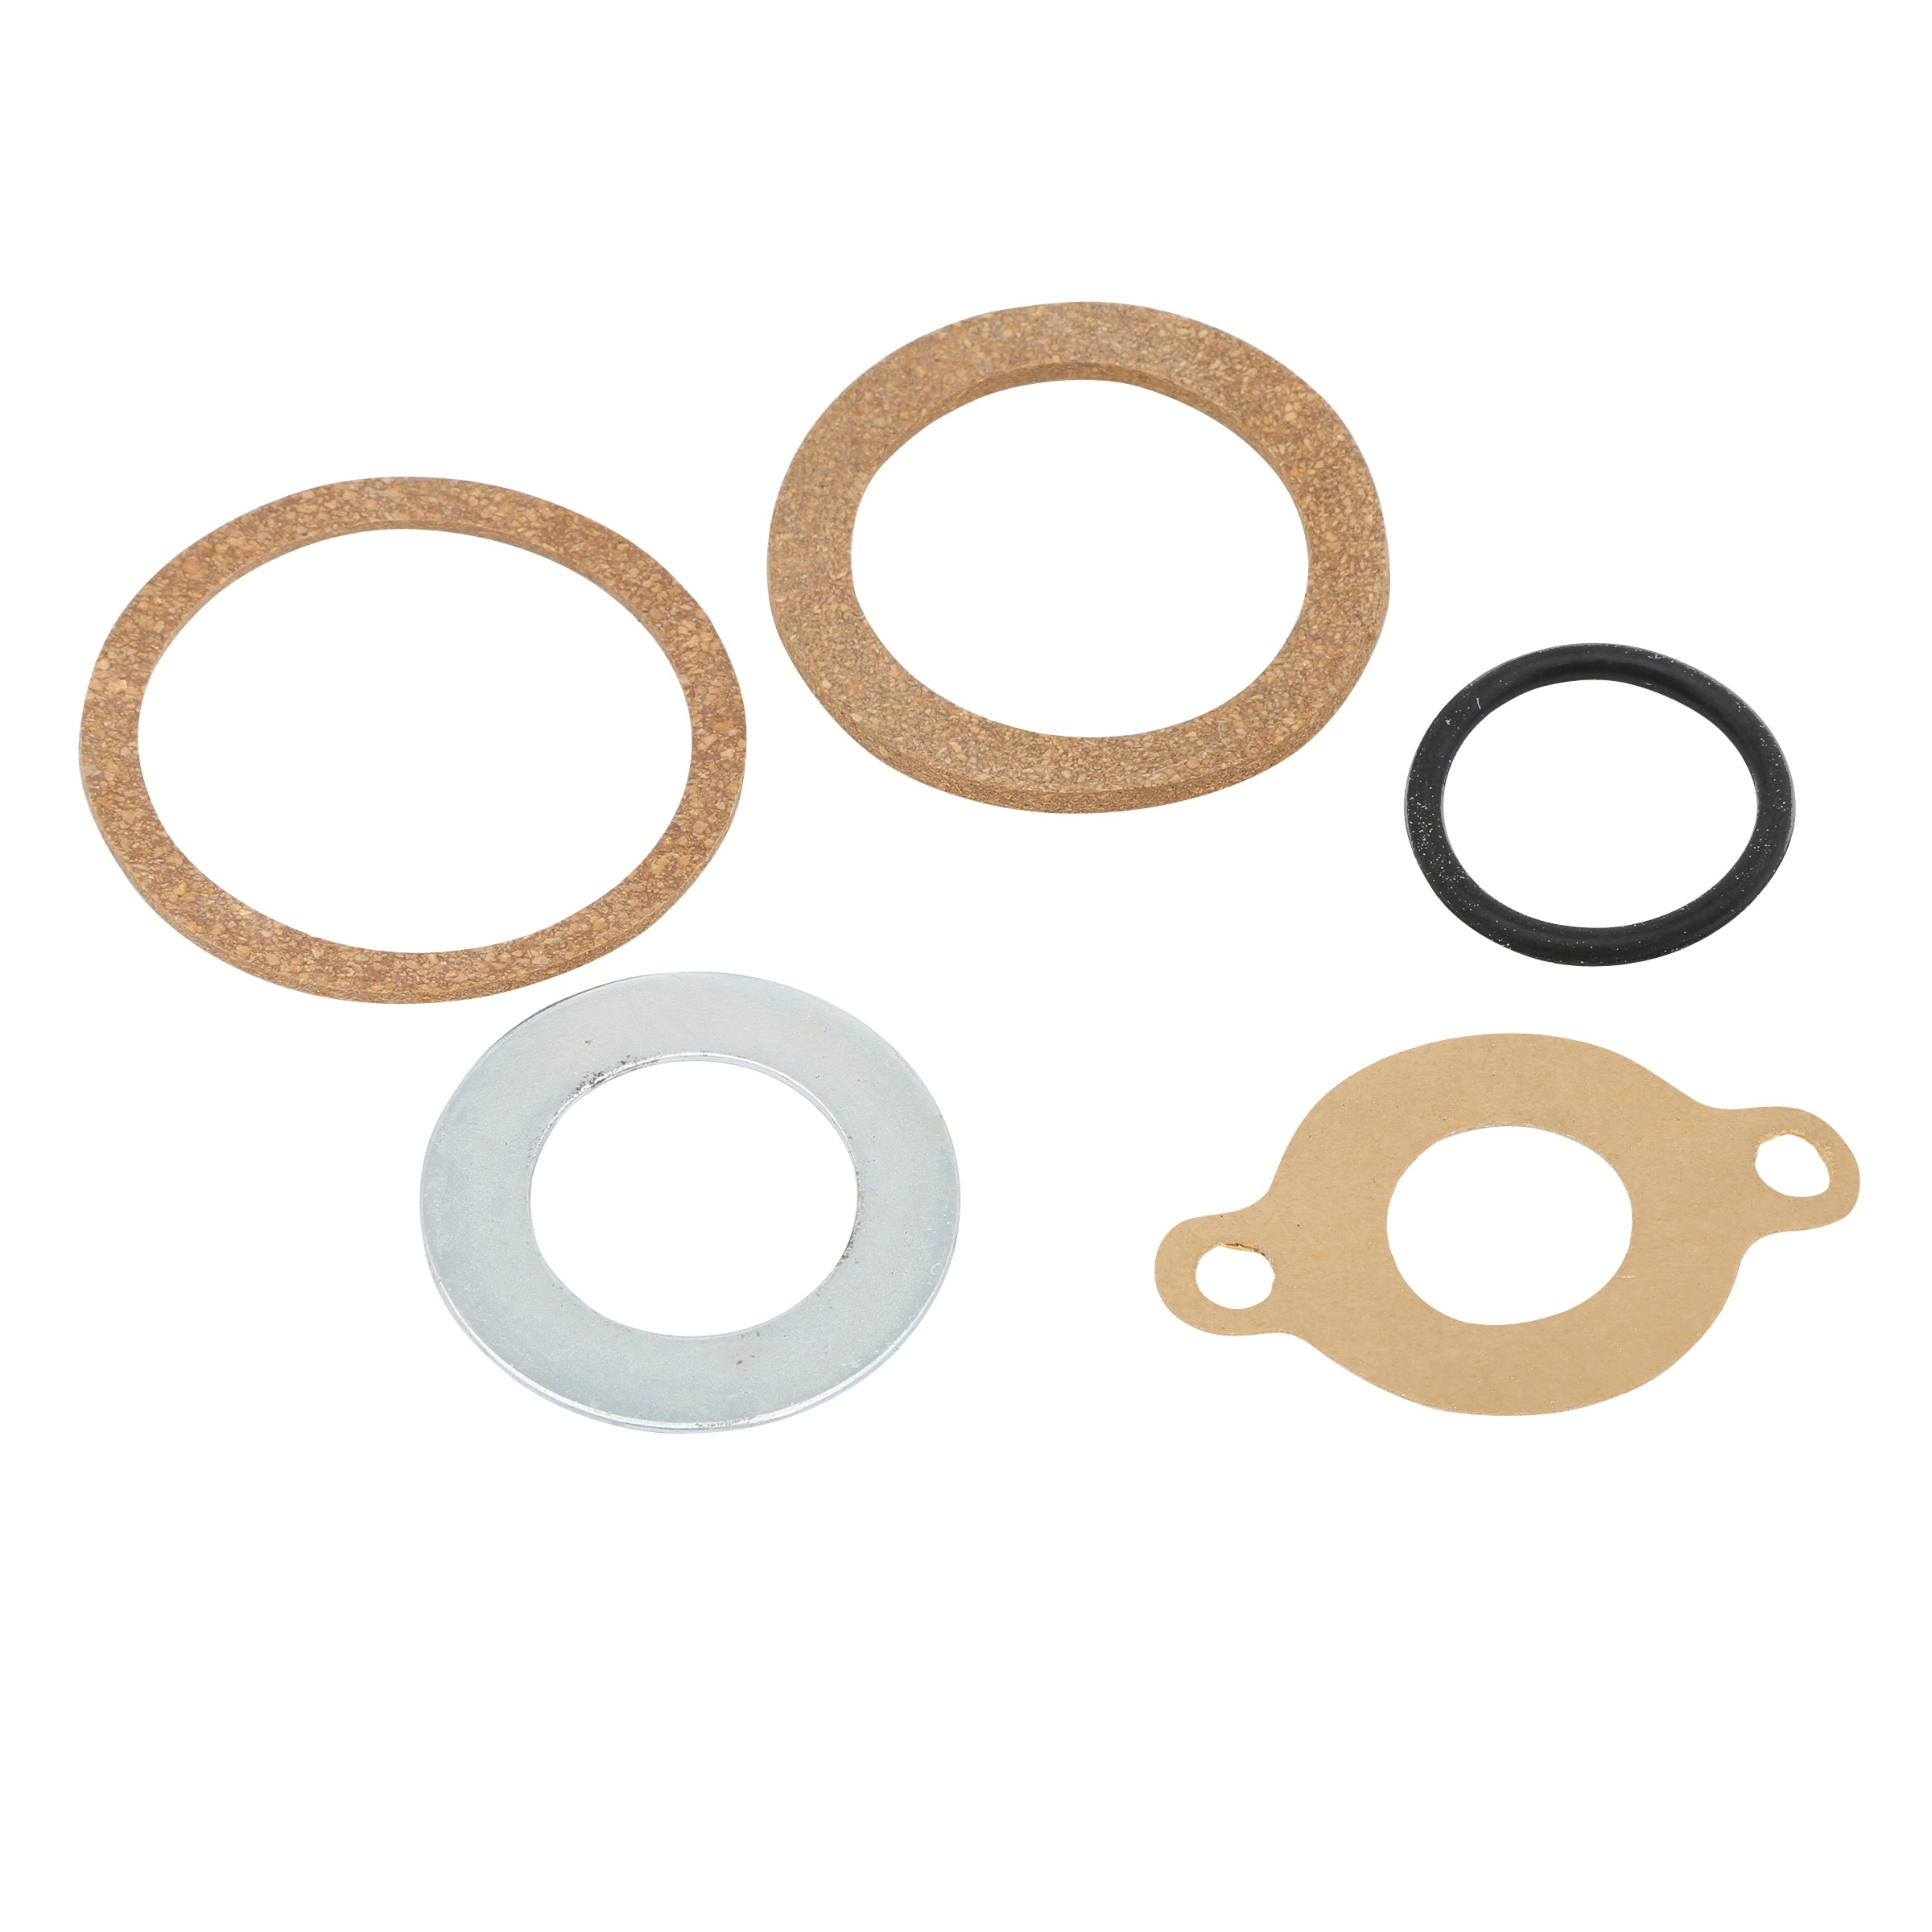 Steering Box Gasket Set (2 Tooth) • 1929-31 Model A Ford